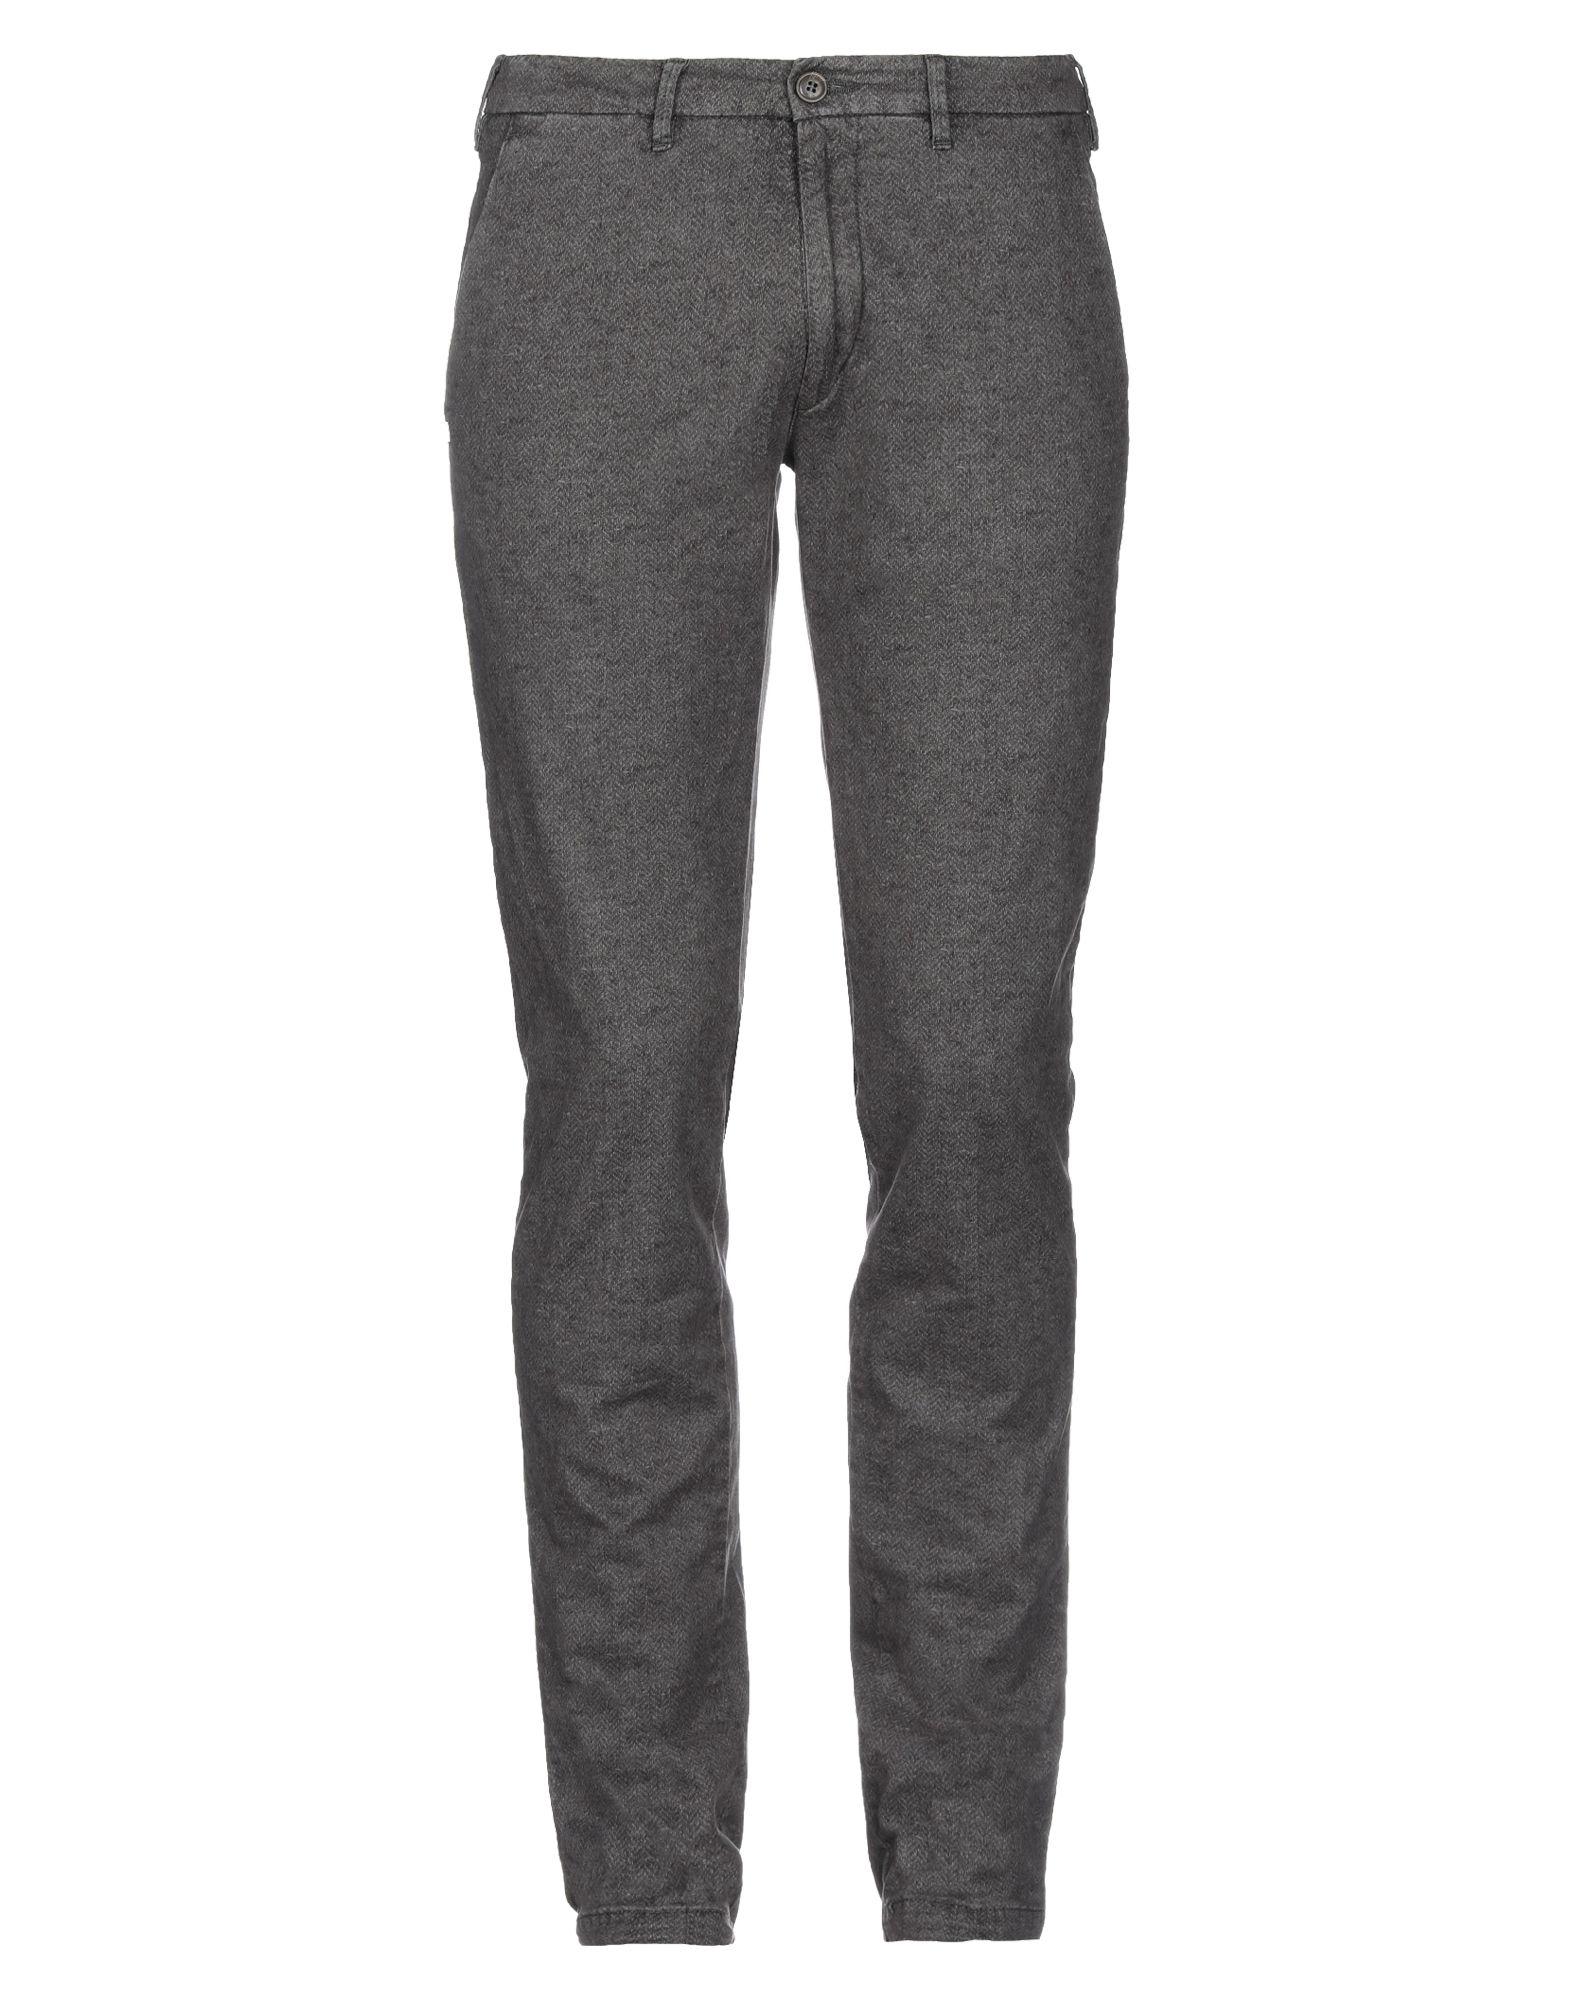 40weft Cotton Casual Pants in Steel Grey (Gray) for Men - Lyst